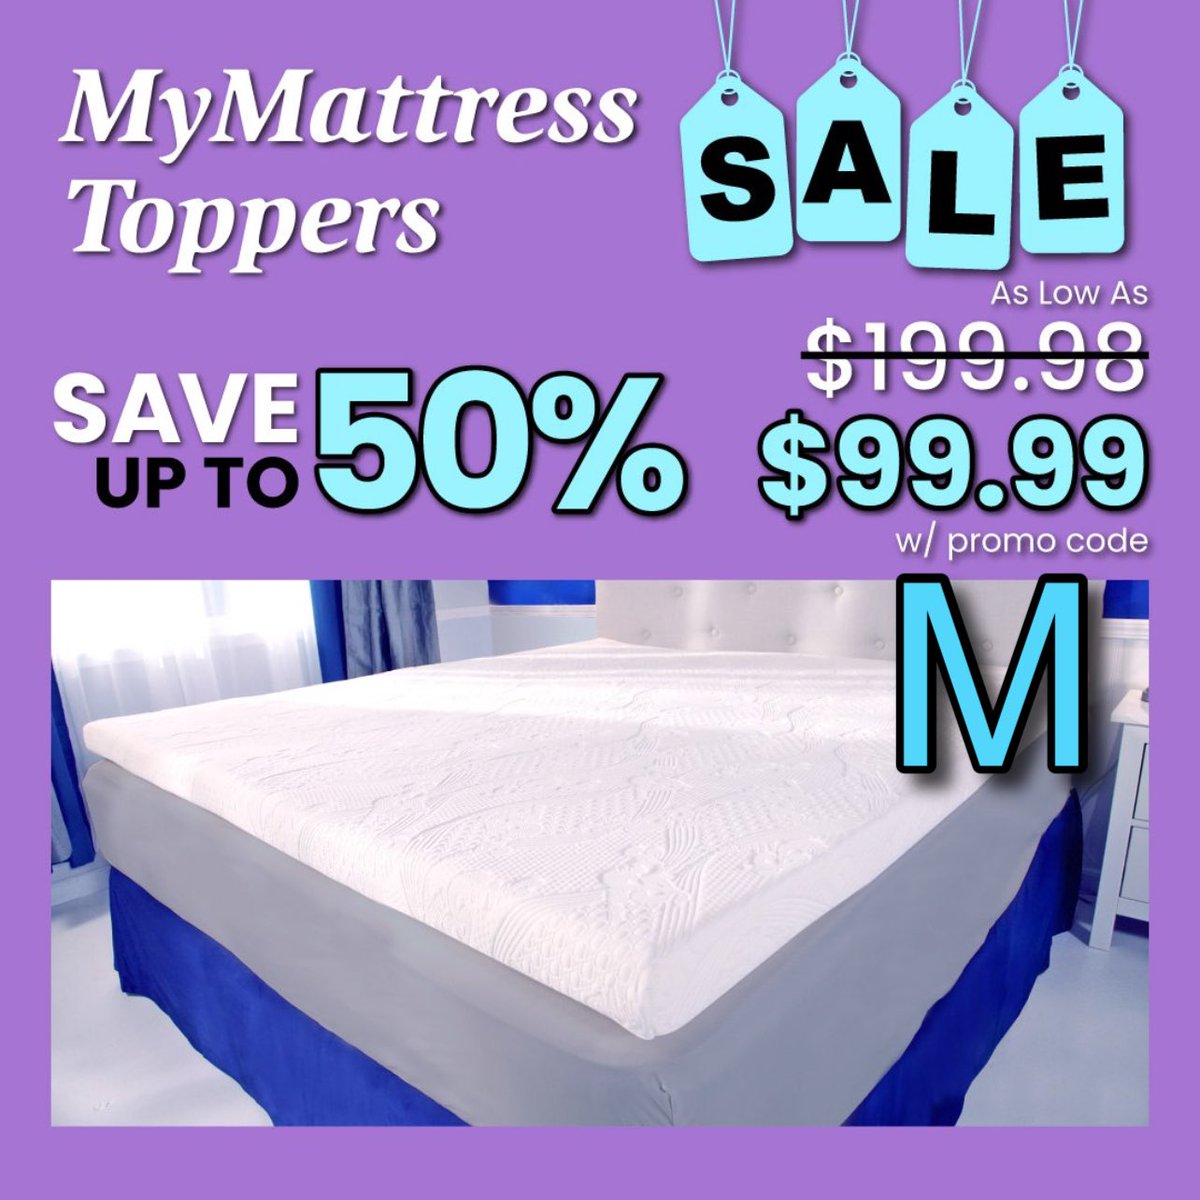 Save up to 50% on #MyPillow MyMattress Toppers with promo code 👉M👈 and enjoy amazingly supportive comfort all night long. Say goodbye to tossing and turning - transform your bed into a cozy oasis today! mypillow.com/toppers #sweetdreams #sleepbetter #MyPillowPromoCodeM